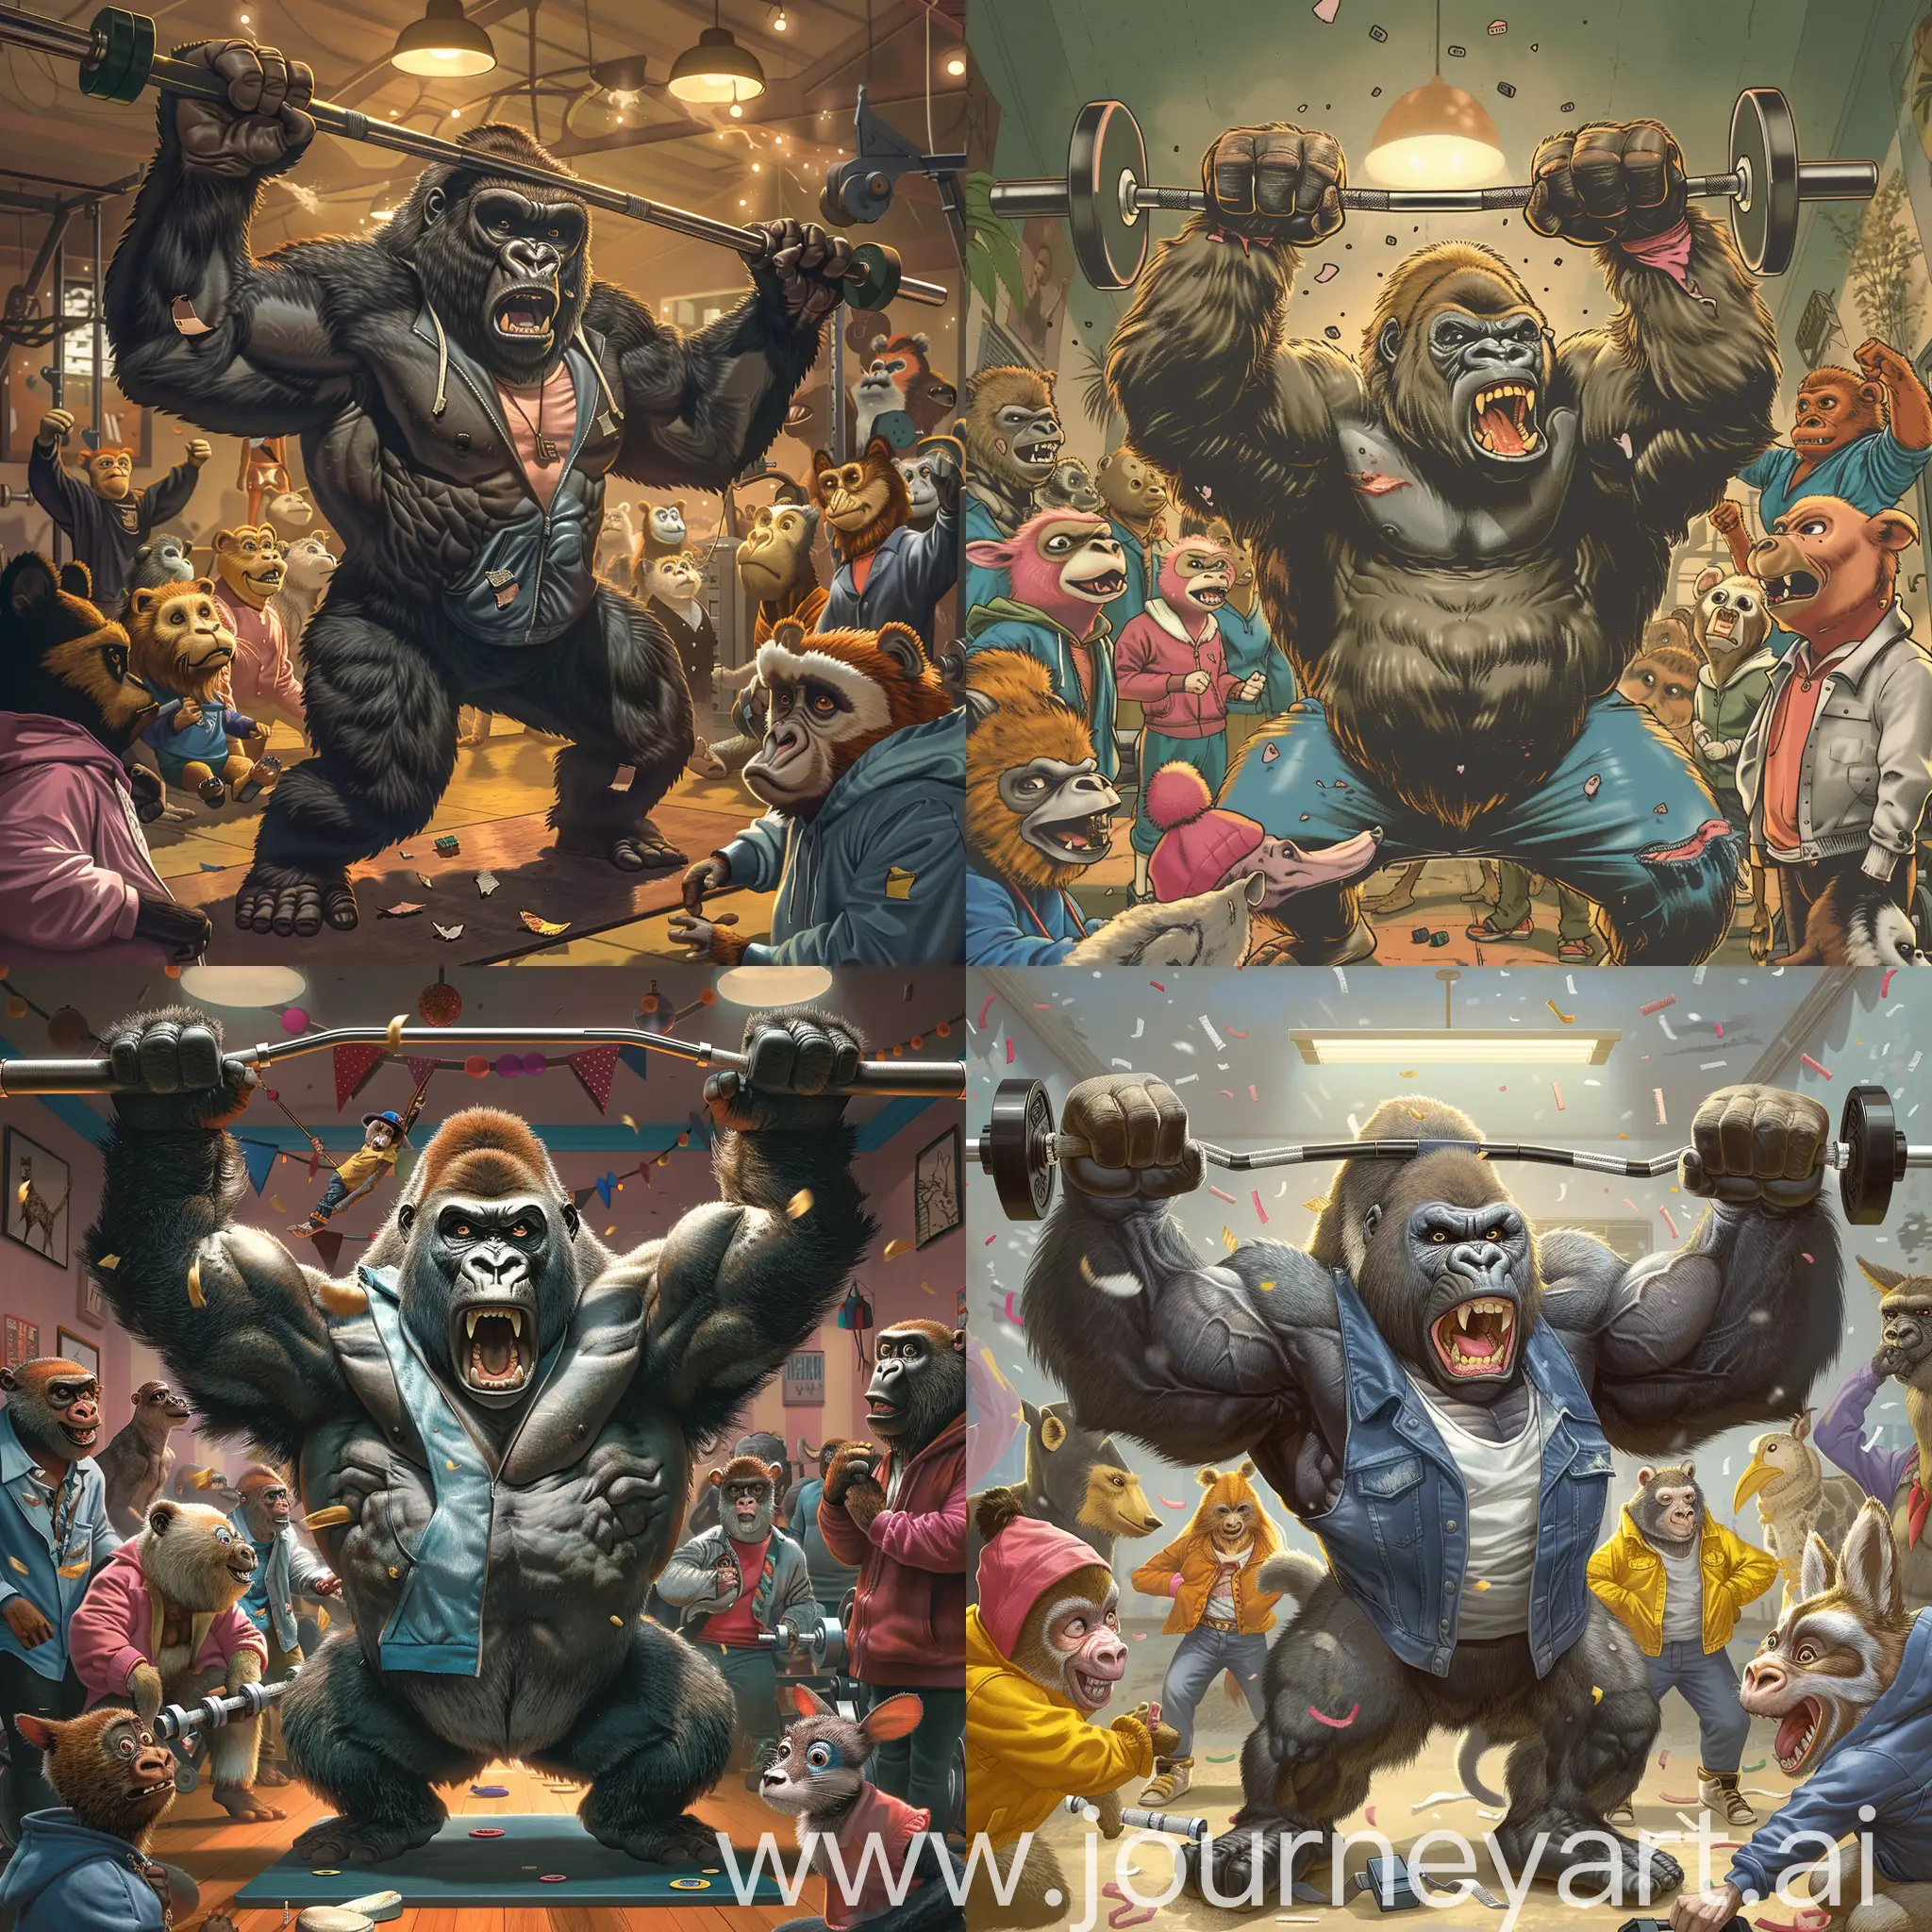 Powerful-Gorilla-Pumping-Iron-Surrounded-by-Astounded-Animals-in-Retro-Attire